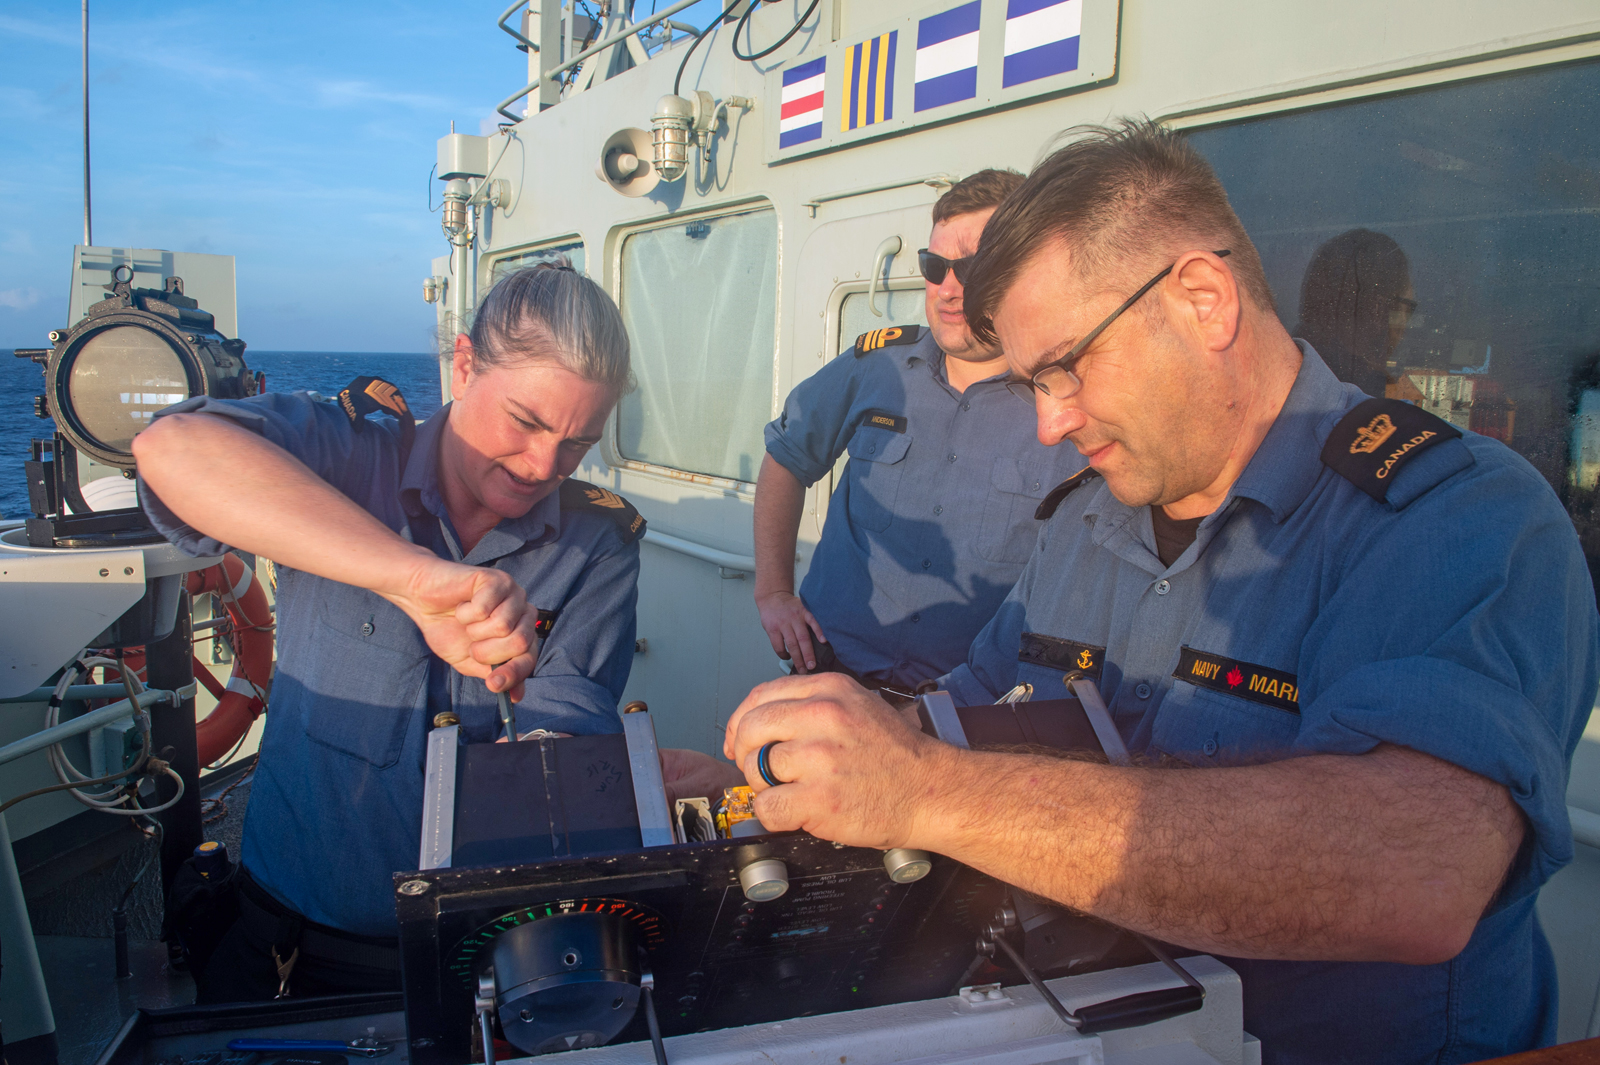 Royal Canadian Navy members work on the helm console of HMCS Summerside during Operation Caribbe in the Atlantic Ocean on Oct. 29. Members are not named for operational security purposes. Photos by Lt Sheila Tham, Public Affairs Officer